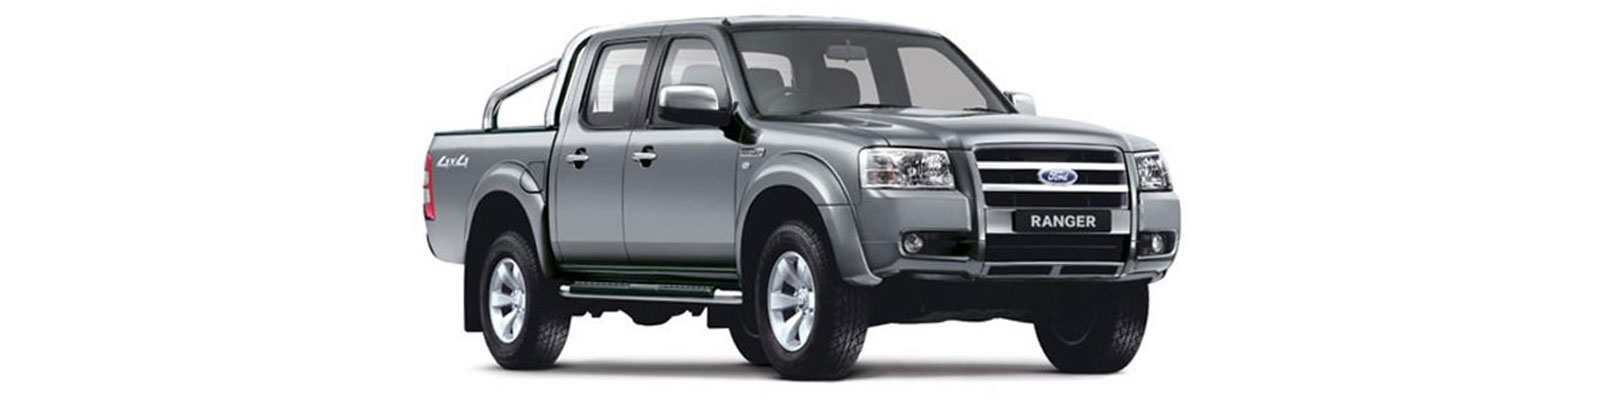 Accessories For The Ford Ranger Double Cab 2006-2009